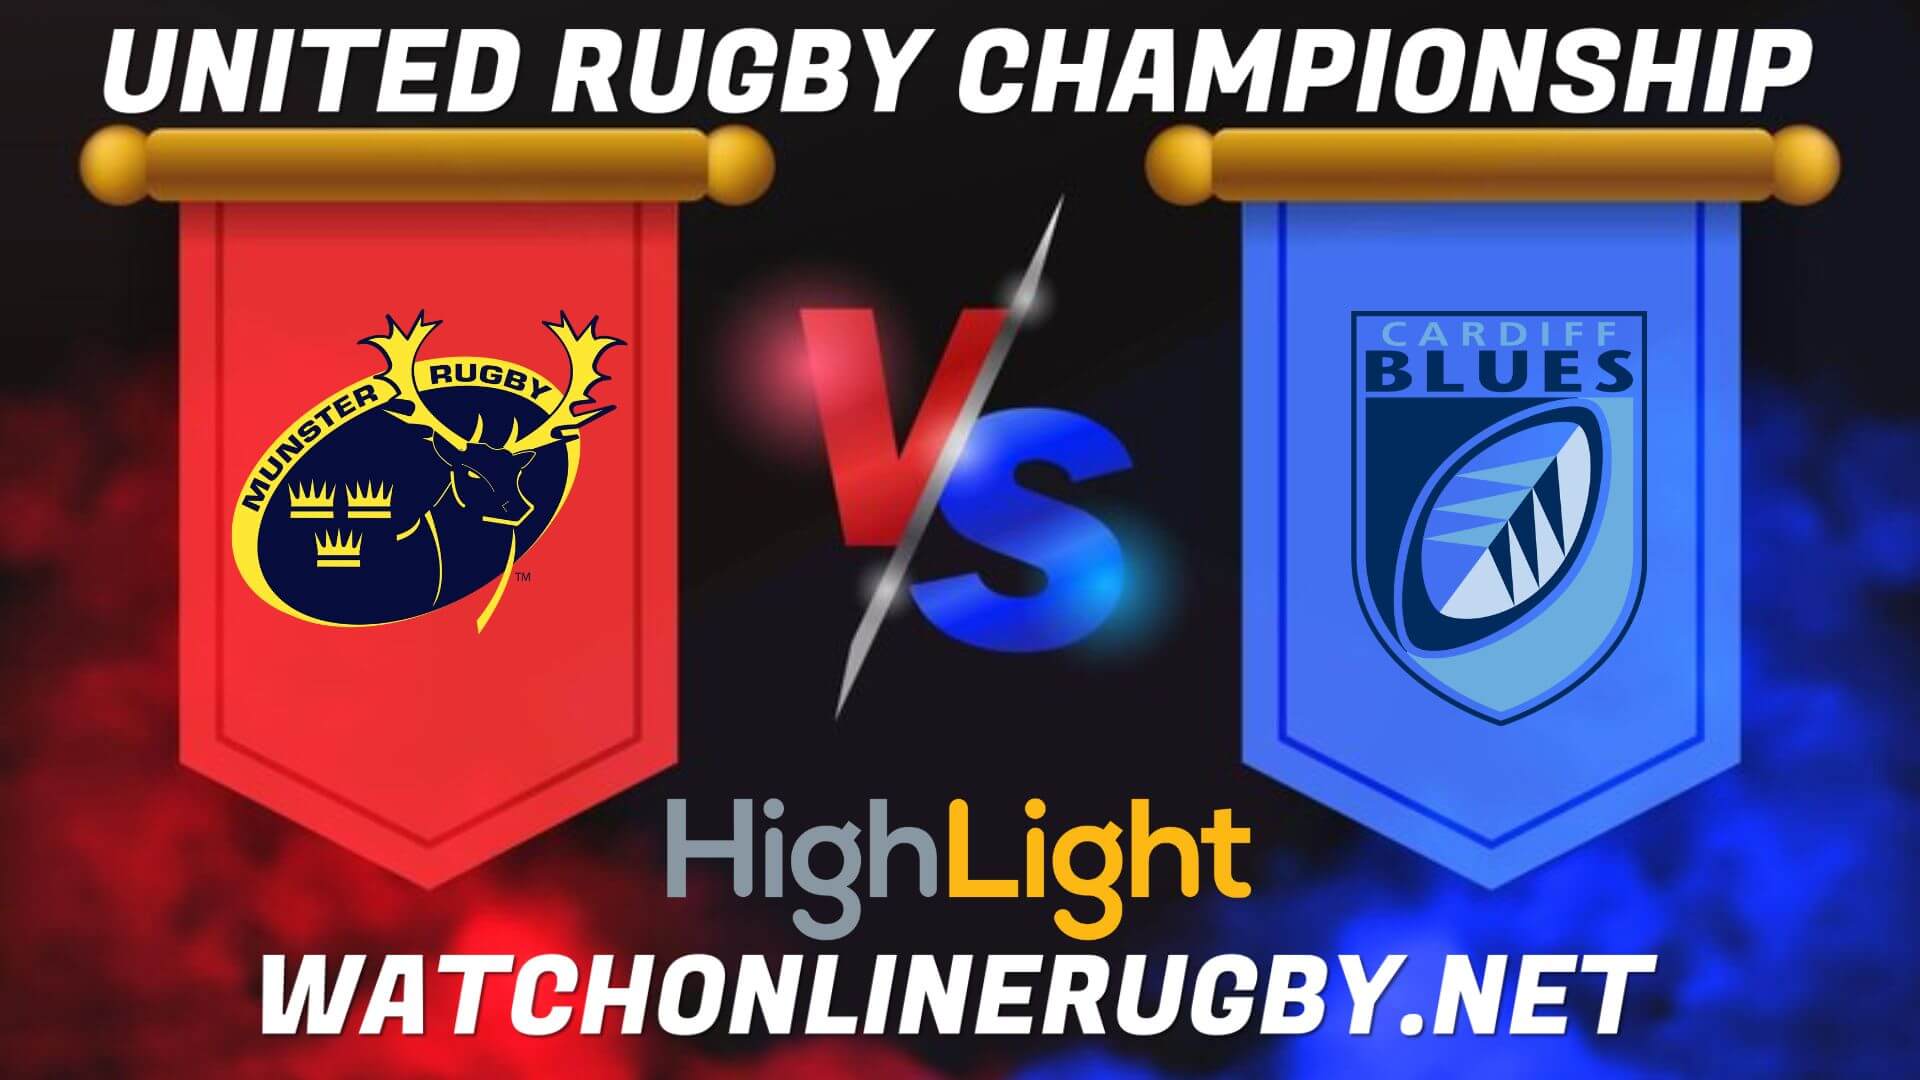 Munster Vs Cardiff Rugby United Rugby Championship 2022 RD 17